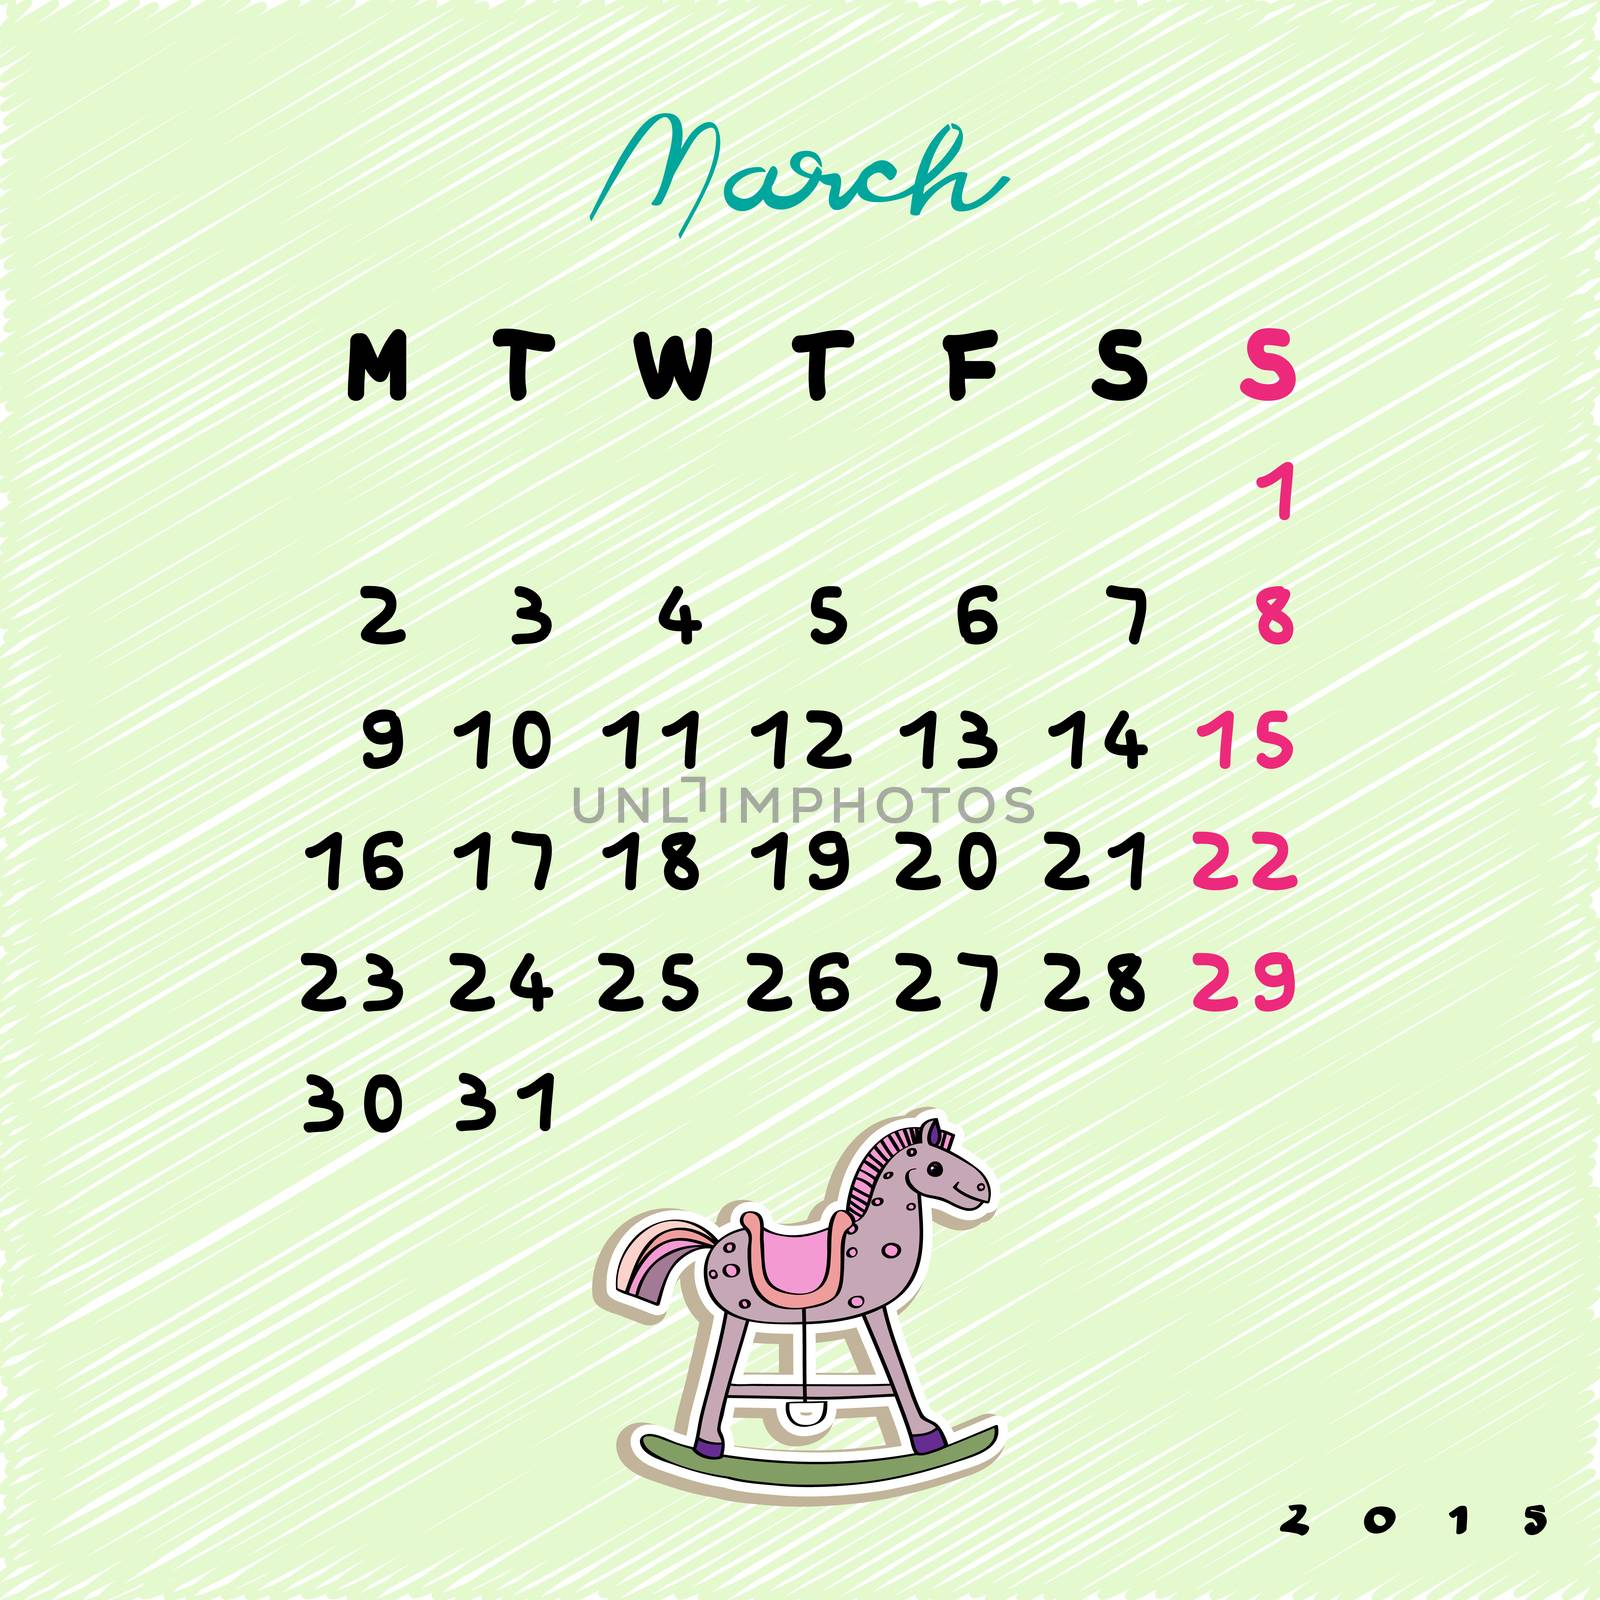 Calendar 2015 with toy horse, graphic illustration of March month calendar with original hand drawn text